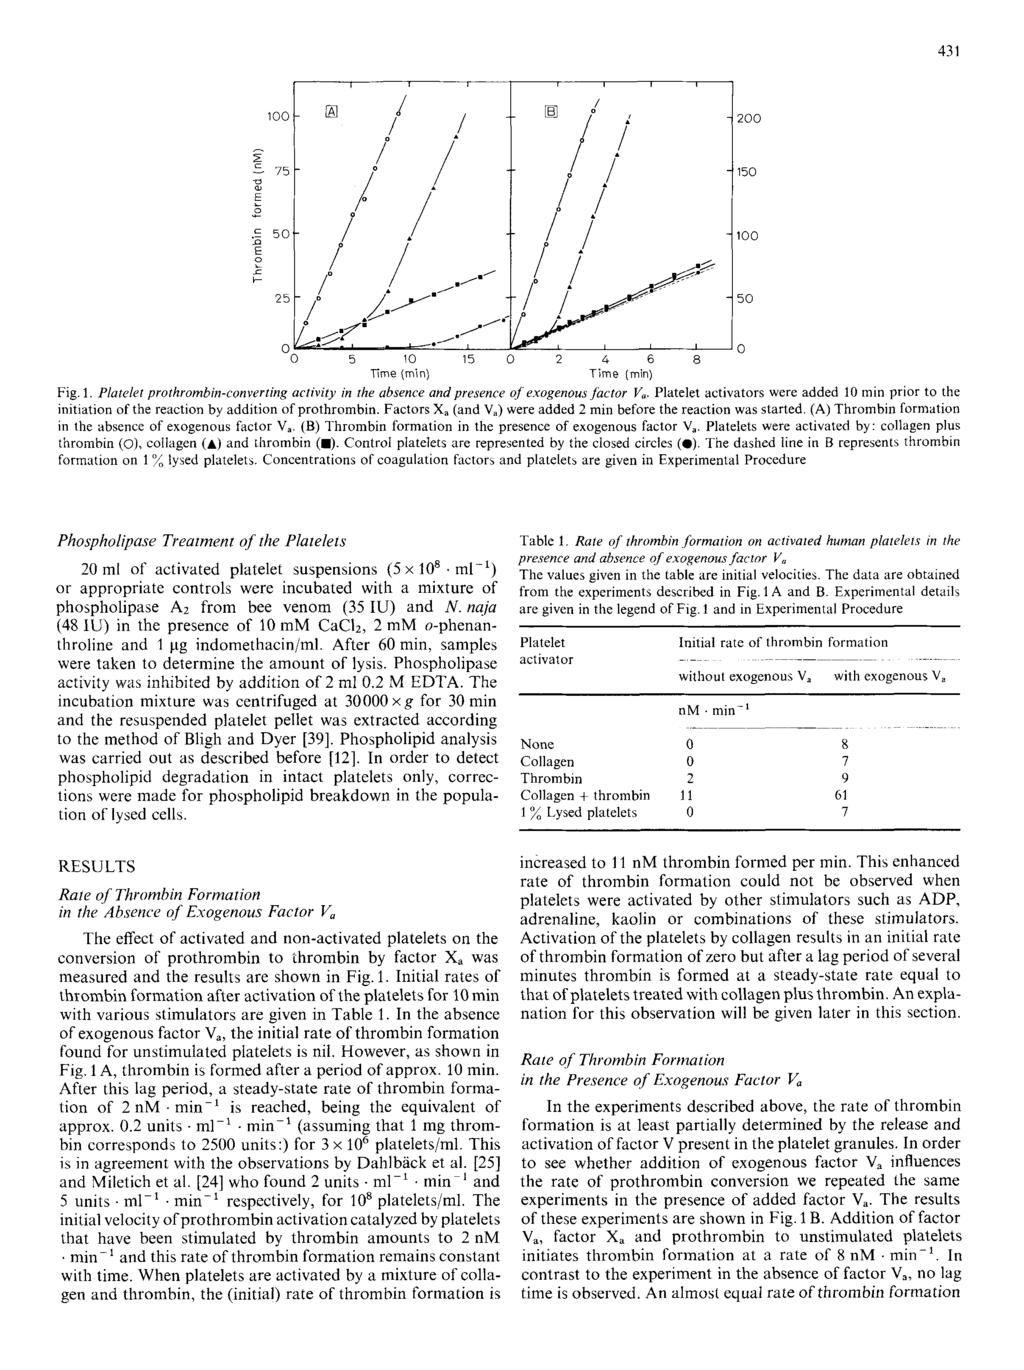 ~ _ ~ 43 1 I I I I I I I I I - 200-150 - 100-50 0 0 5 10 15 0 2 4 6 8 Time (min) Time (min) Fig. 1. Platelet prothrombin-converting activity in the absence and presence of exogenous factor V,.